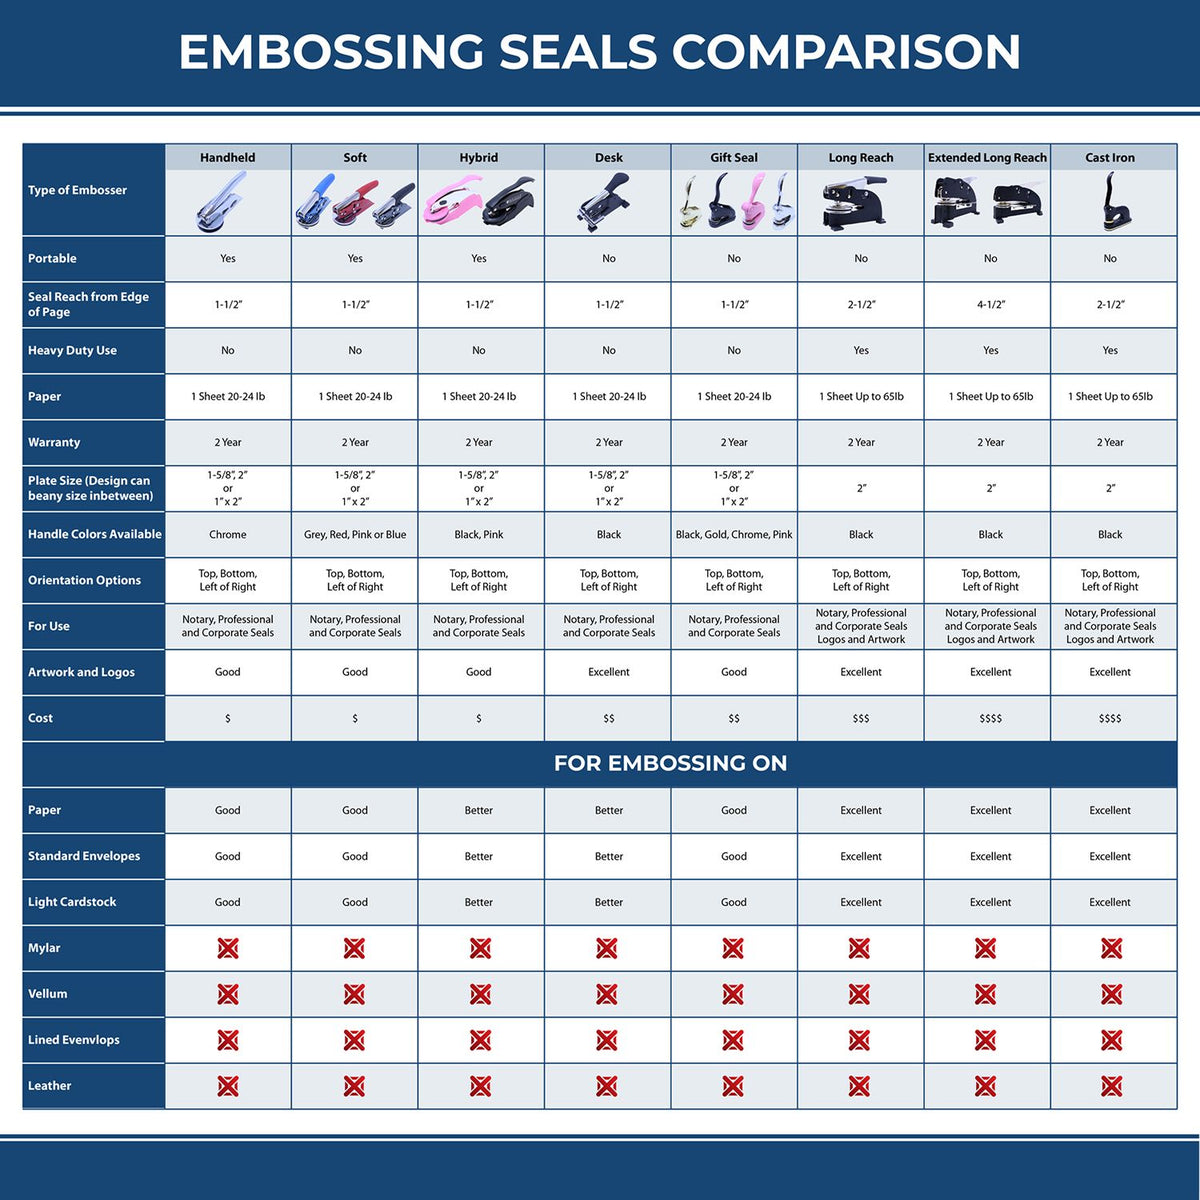 A comparison chart for the different types of mount models available for the Heavy Duty Cast Iron Connecticut Land Surveyor Seal Embosser.